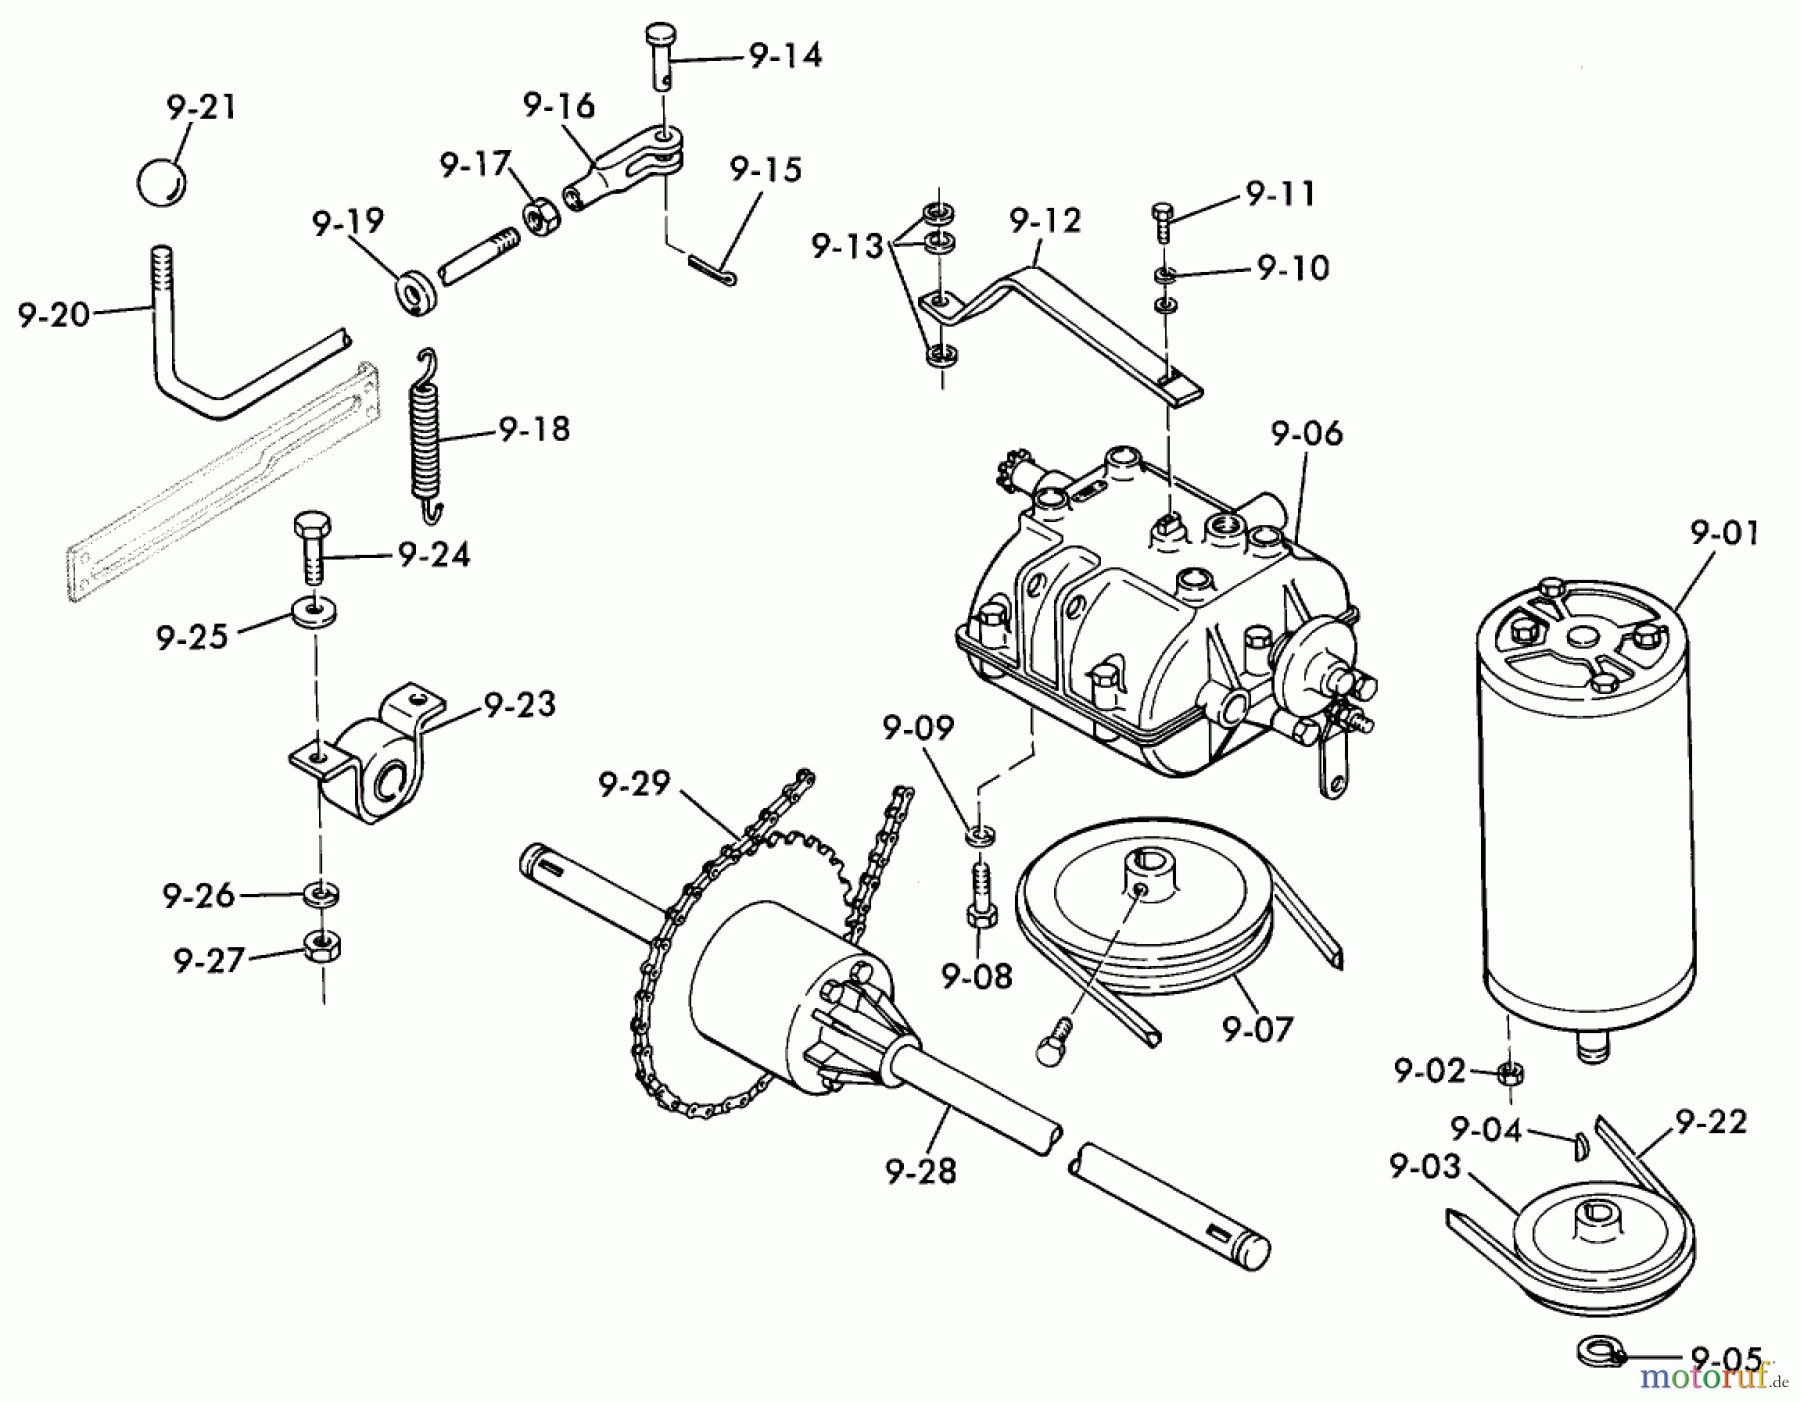  Toro Neu Mowers, Lawn & Garden Tractor Seite 1 3-6000 (A-65) - Toro A-65 Elec-Trak, 1976 A-65 PARTS MANUAL E9.000 MOTOR, TRANSMISSION AND DRIVE SYSTEM (FIG. 9)